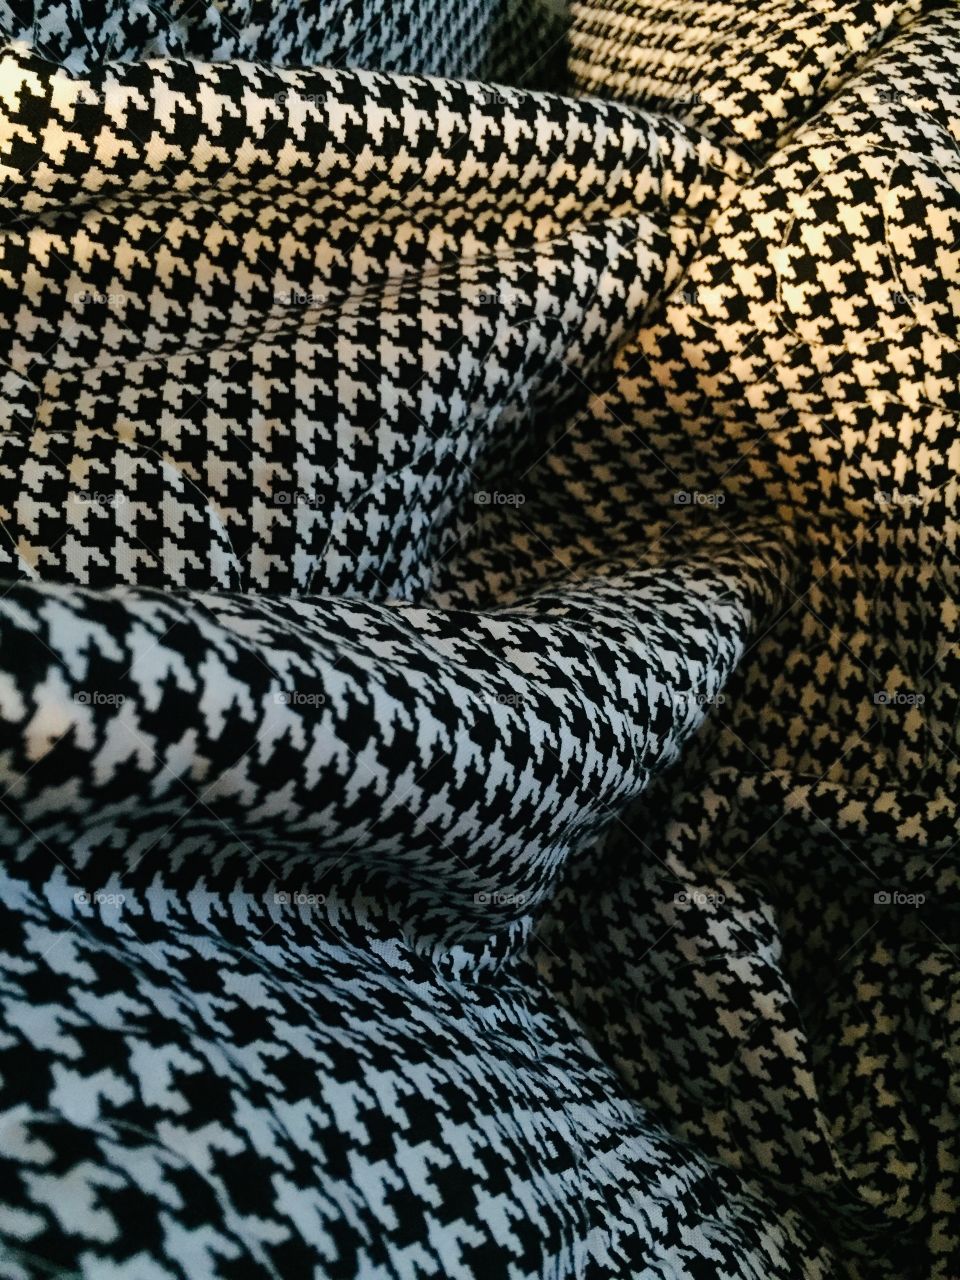 The black and white houndstooth quilt. Grandmother made. Covering. Under the lamp light. 